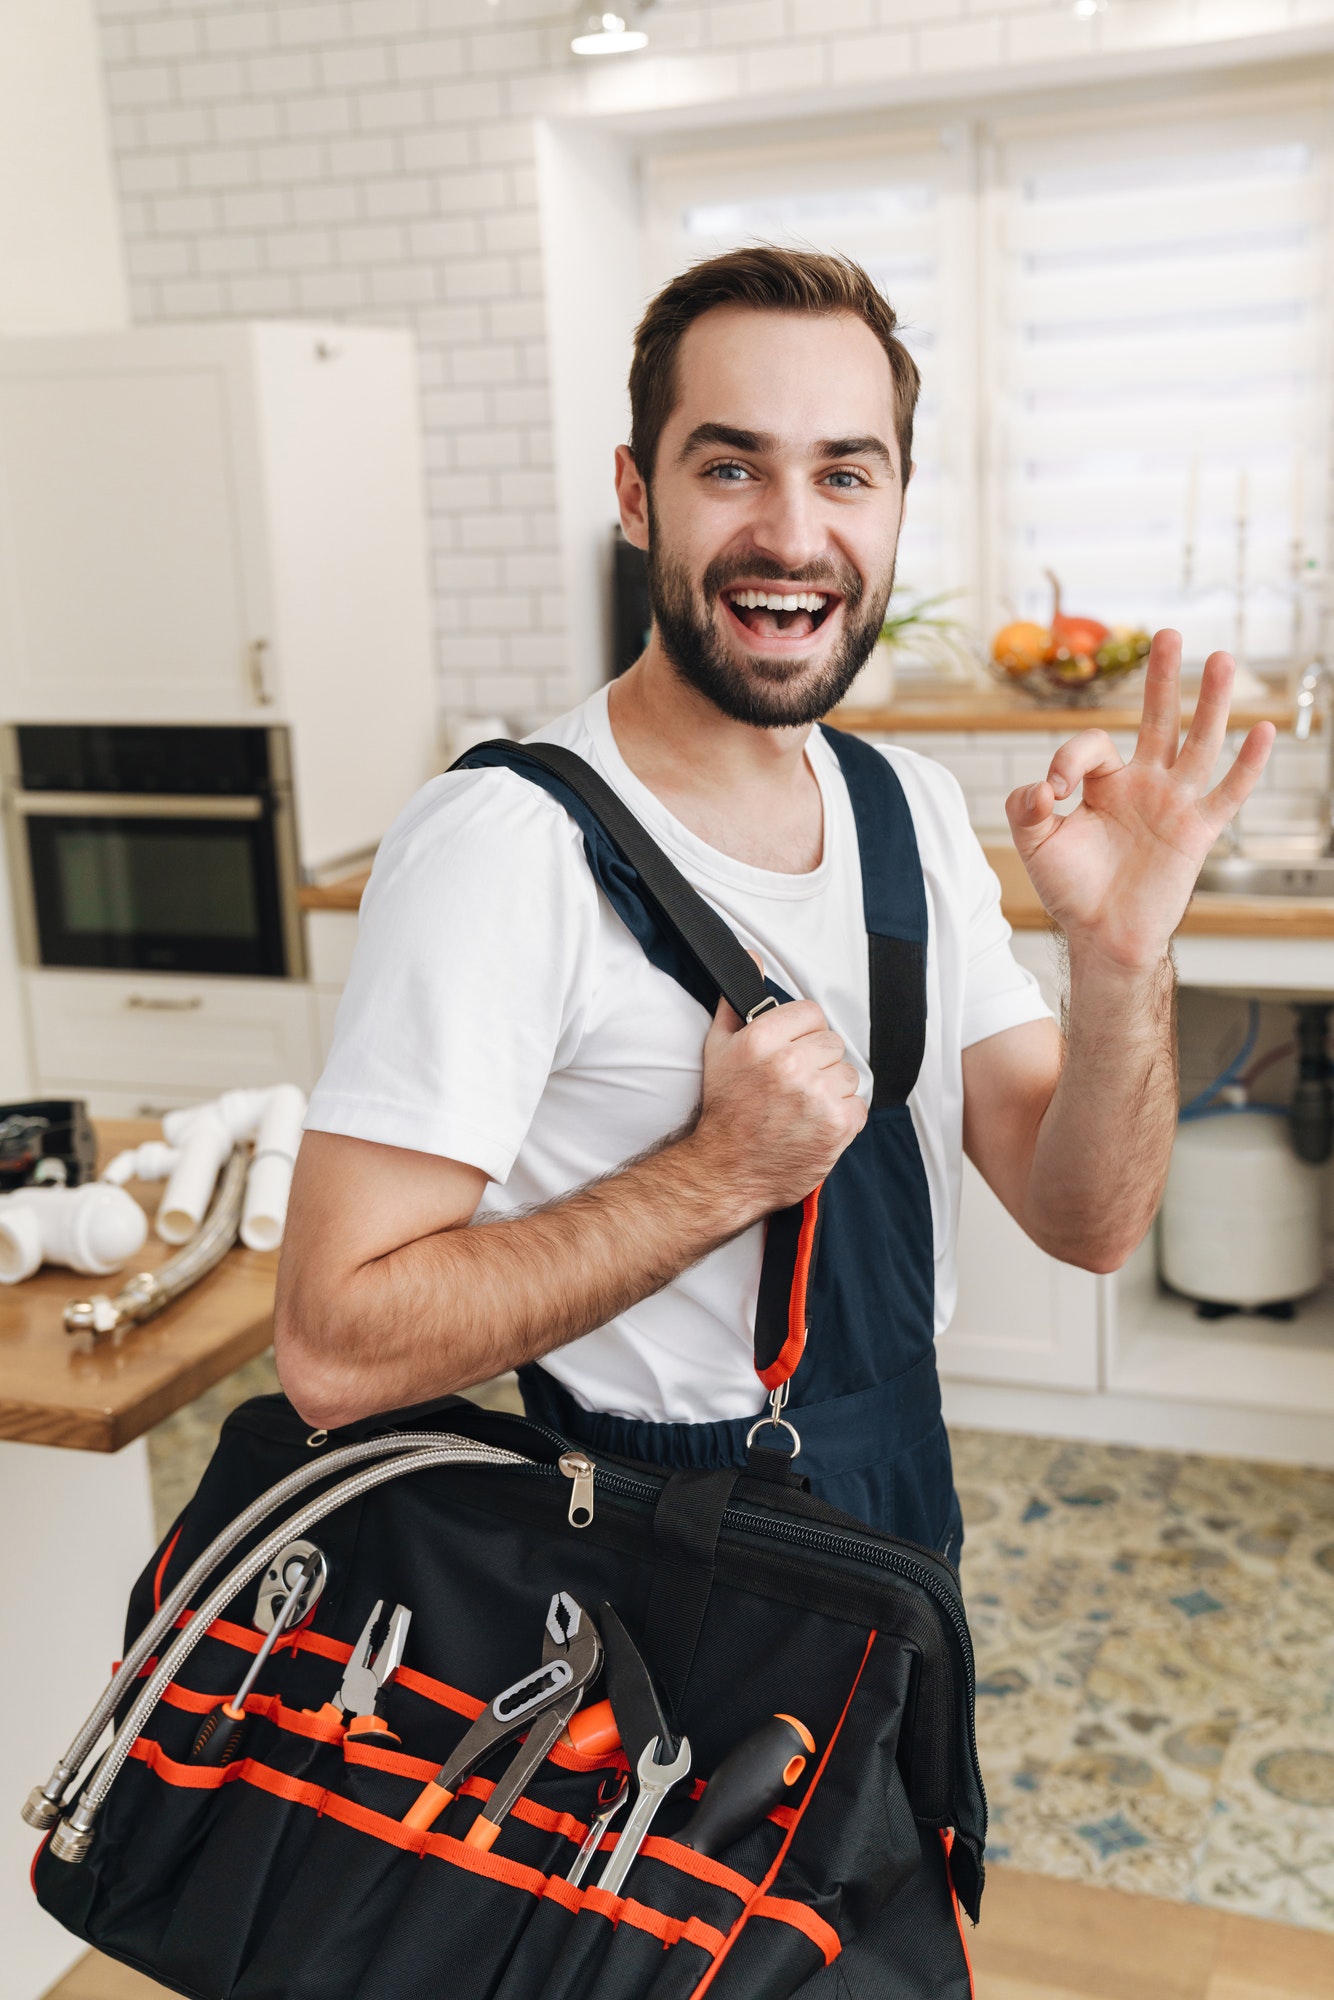 image-of-plumber-man-with-equipment-gesturing-okay-sign-in-apartment.jpg